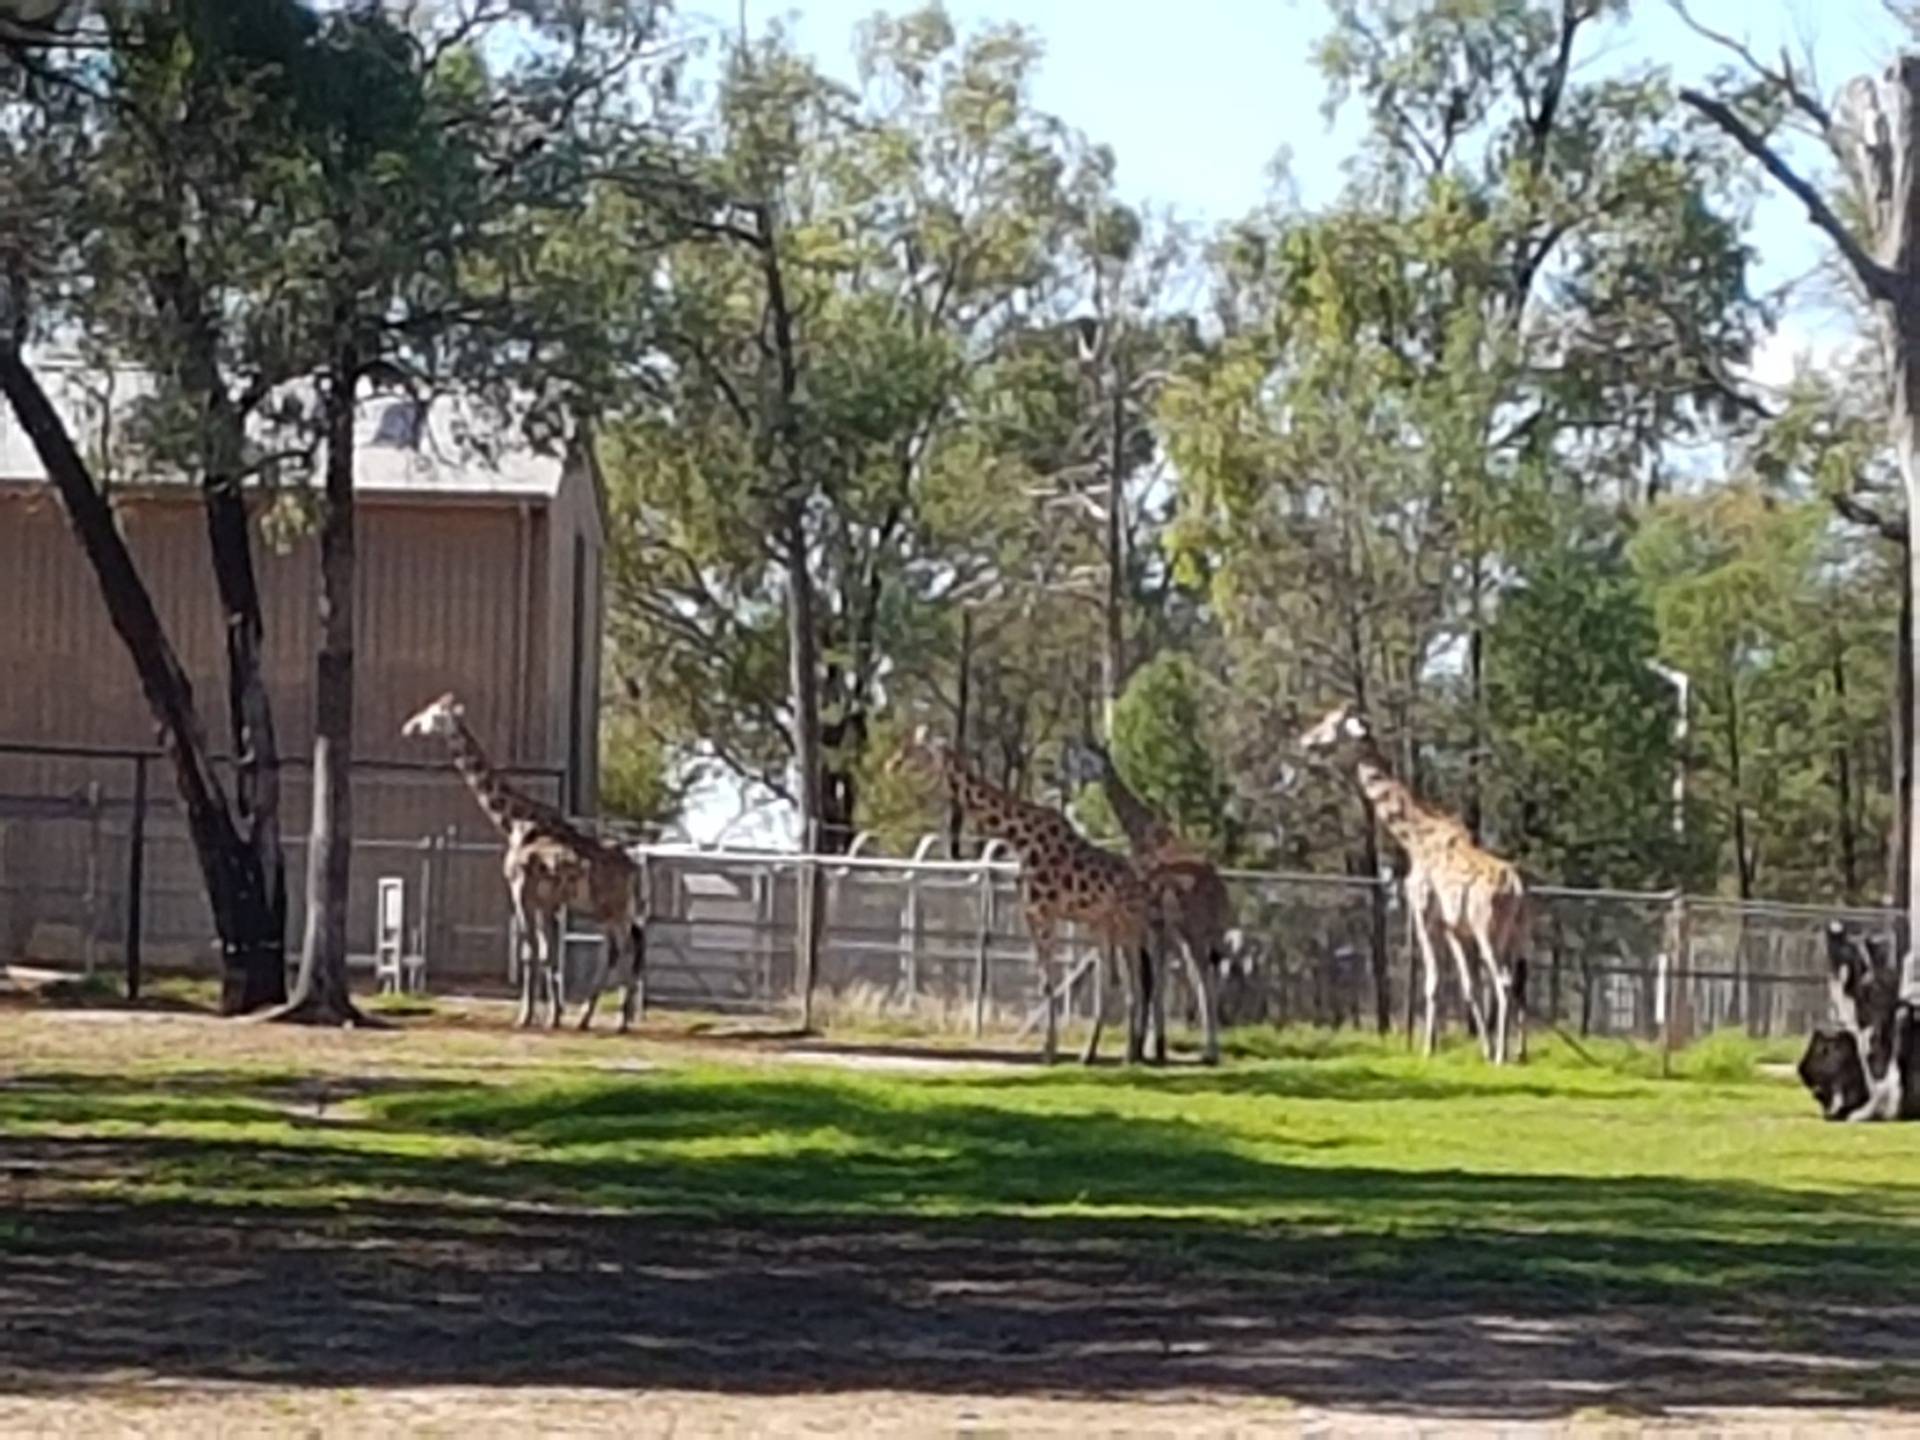 Giraffes and their big house with very tall doors.